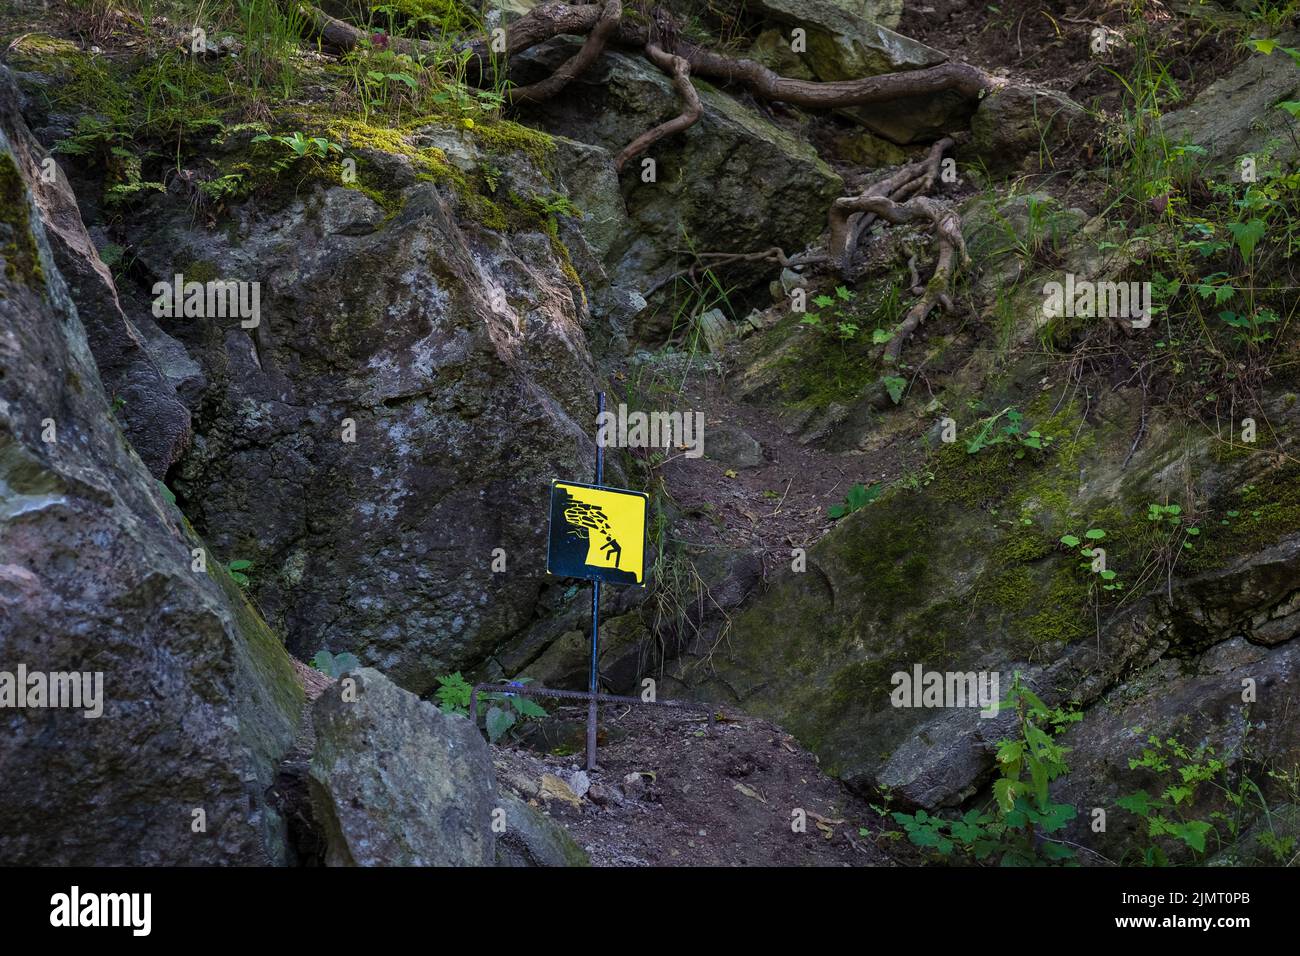 Danger of falling on rocks. No climbing sign in nature. Stock Photo